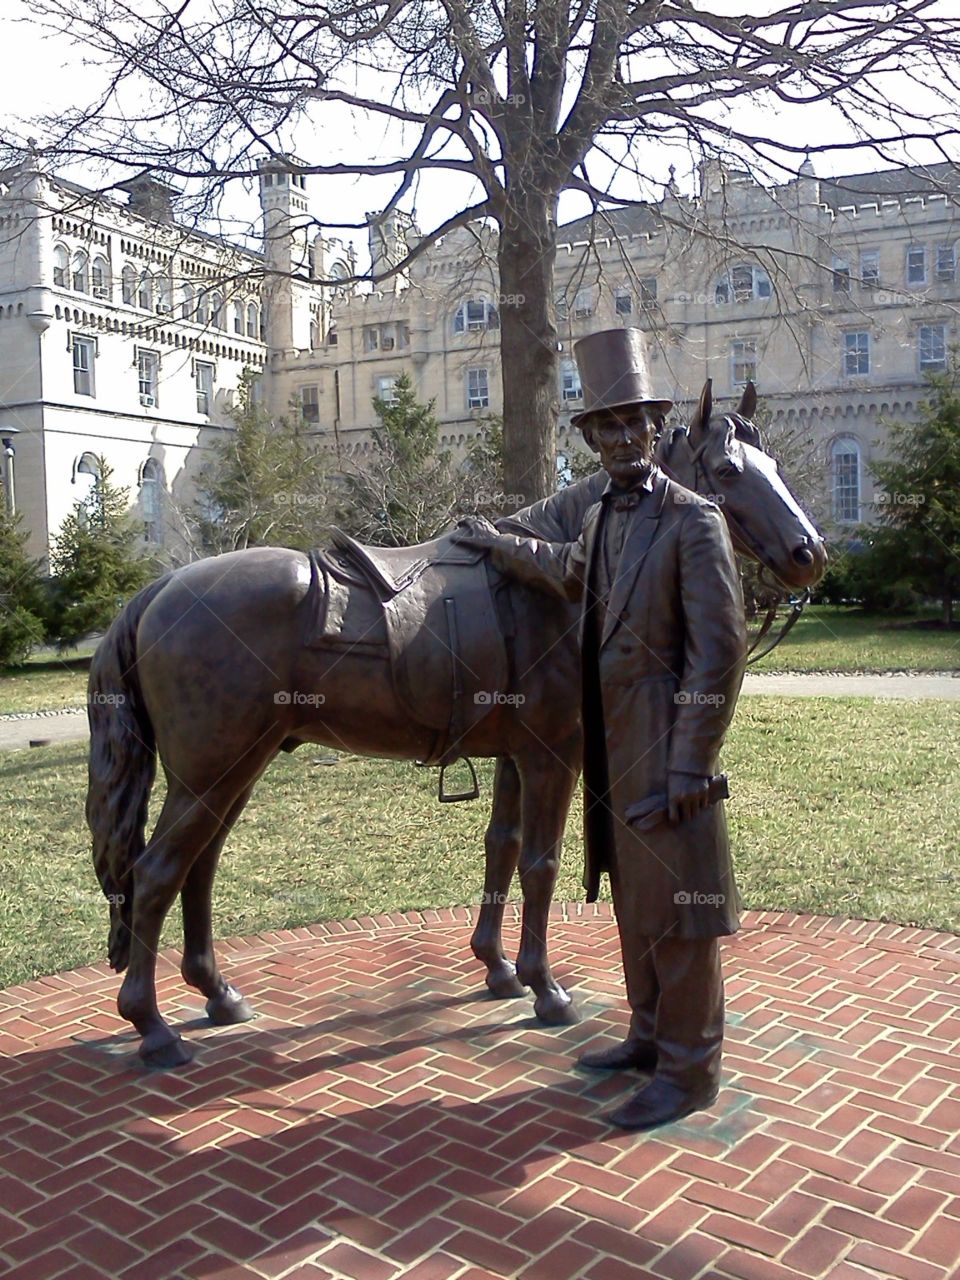 President Lincoln and his horse